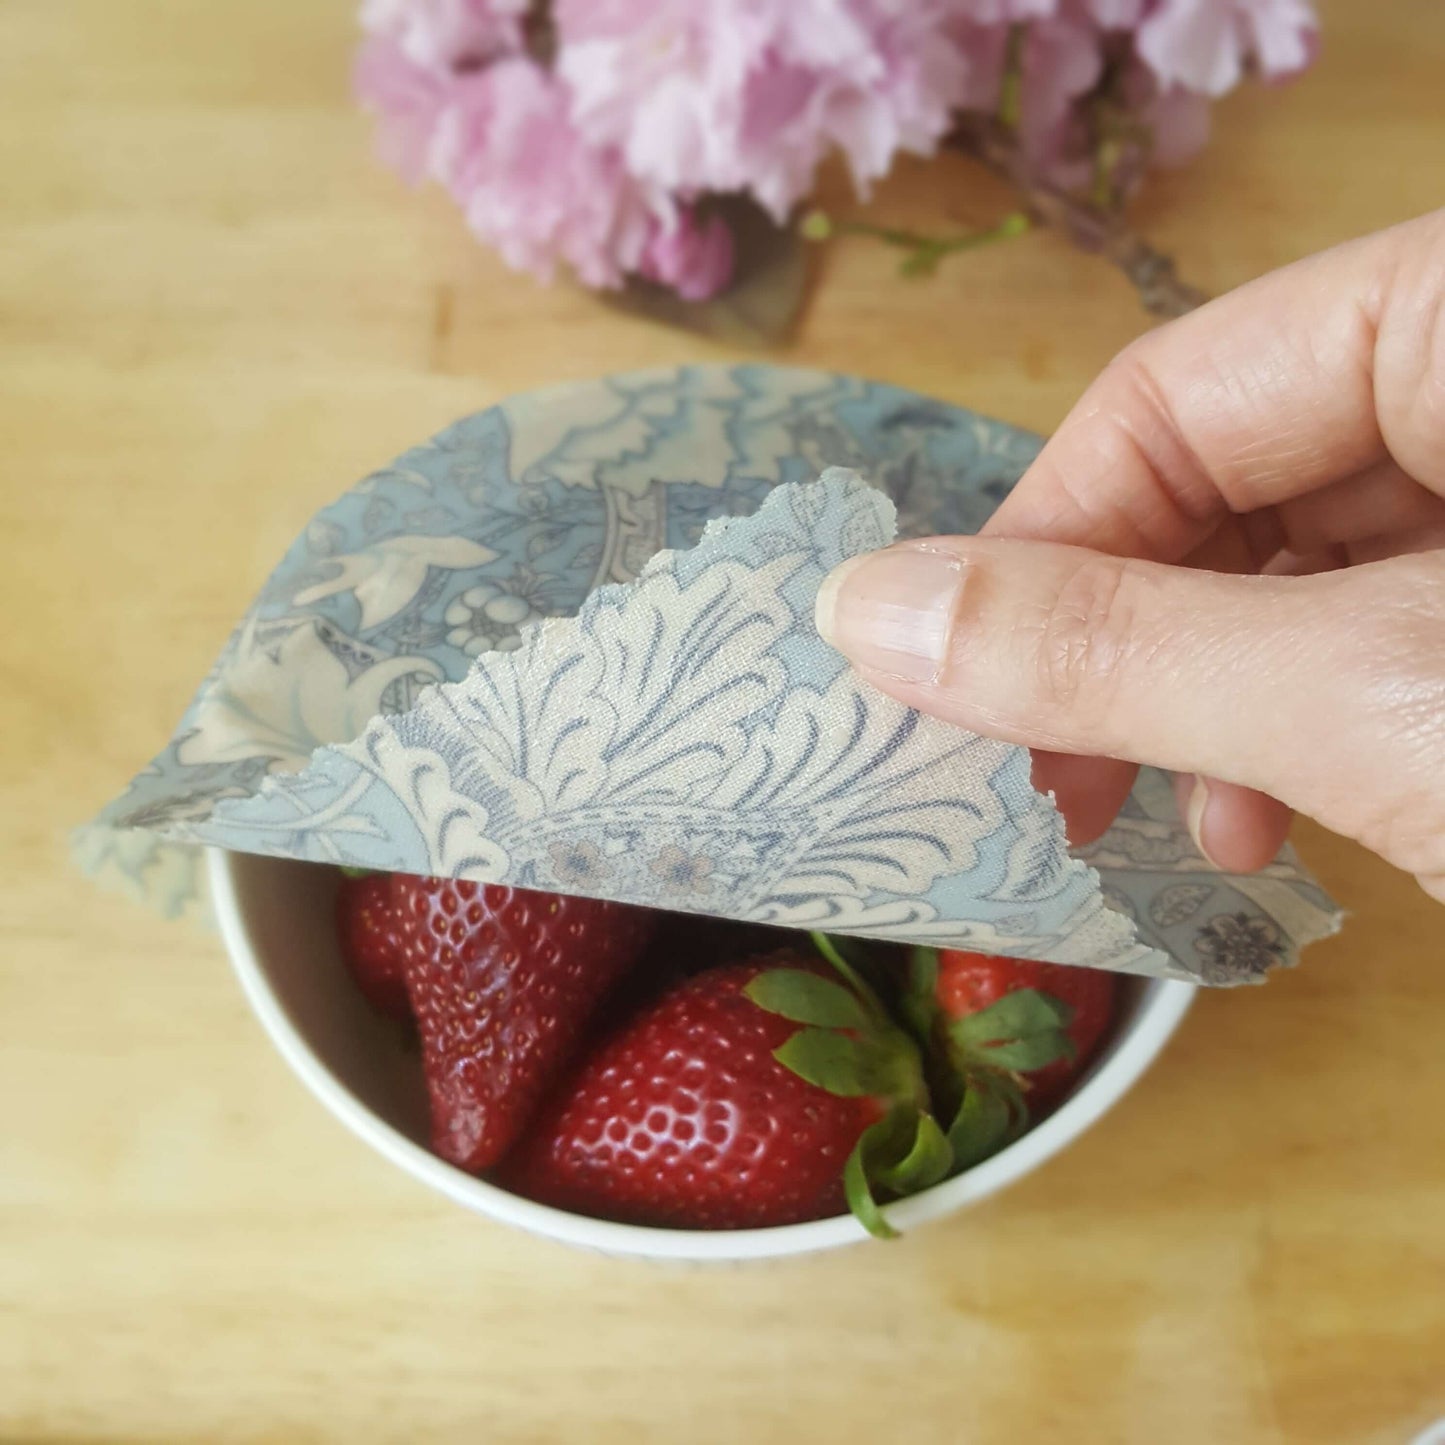 Organic GOTS Cotton Beeswax Wraps William Morris Windrush covering a bowl